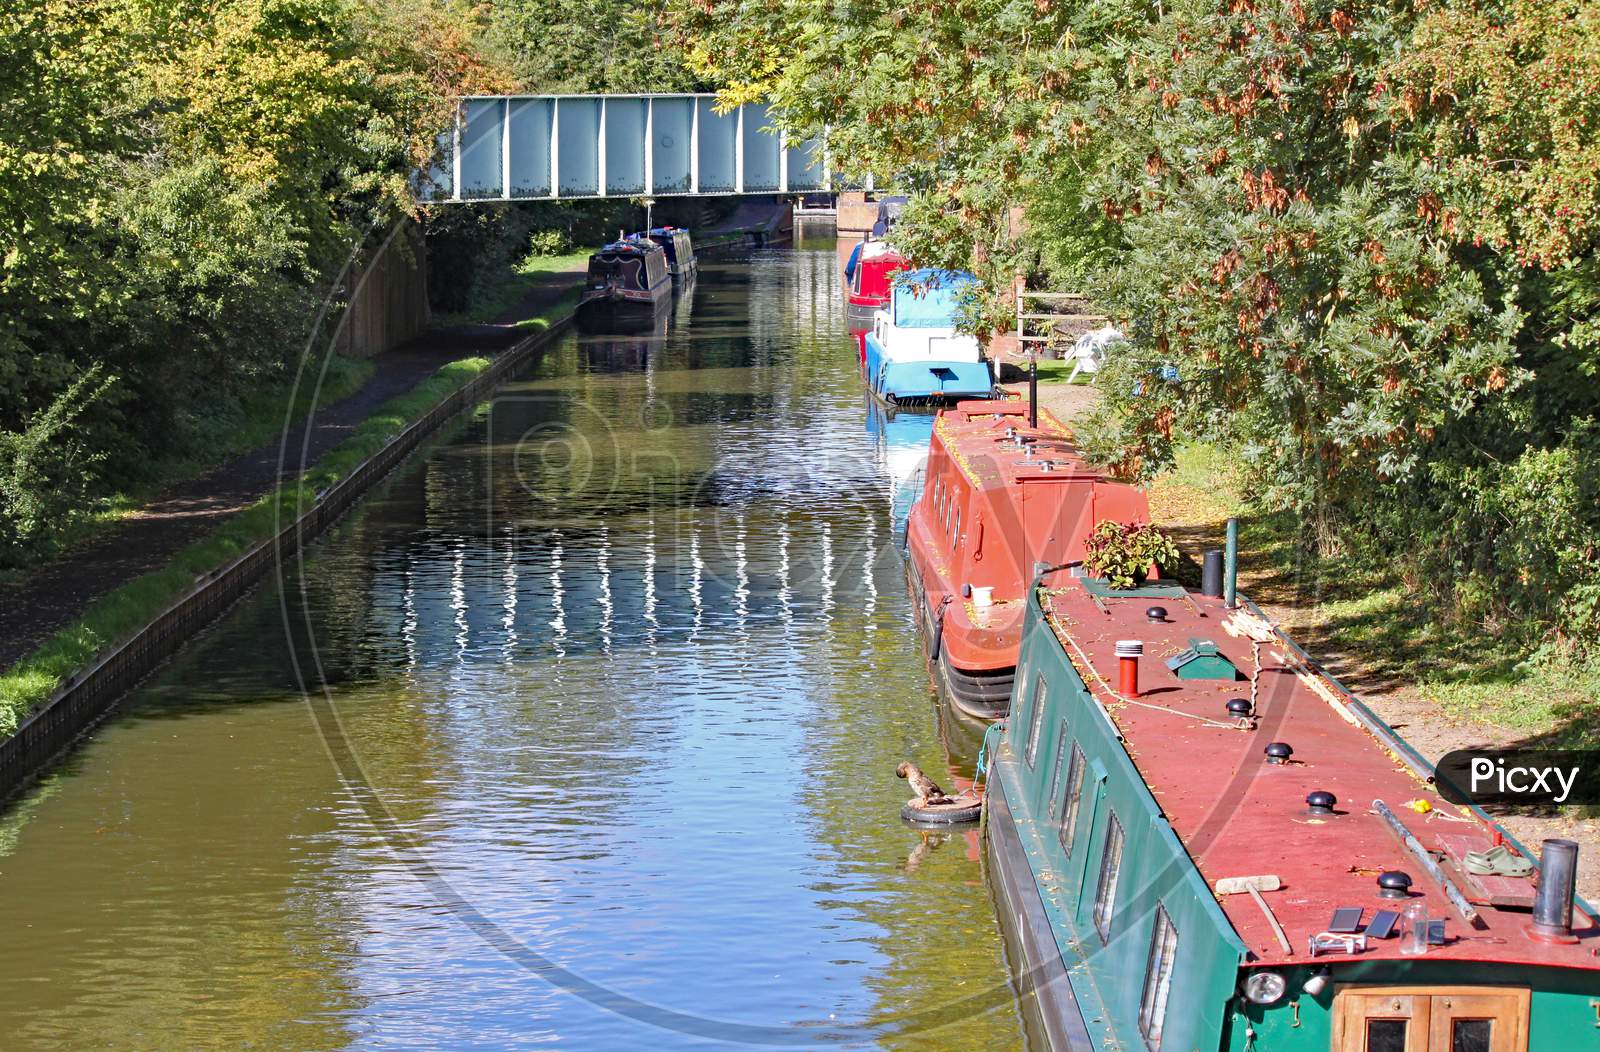 Barges Moored To The Bank On The Grand Union Canal At Lapworth In Warwickshire, England